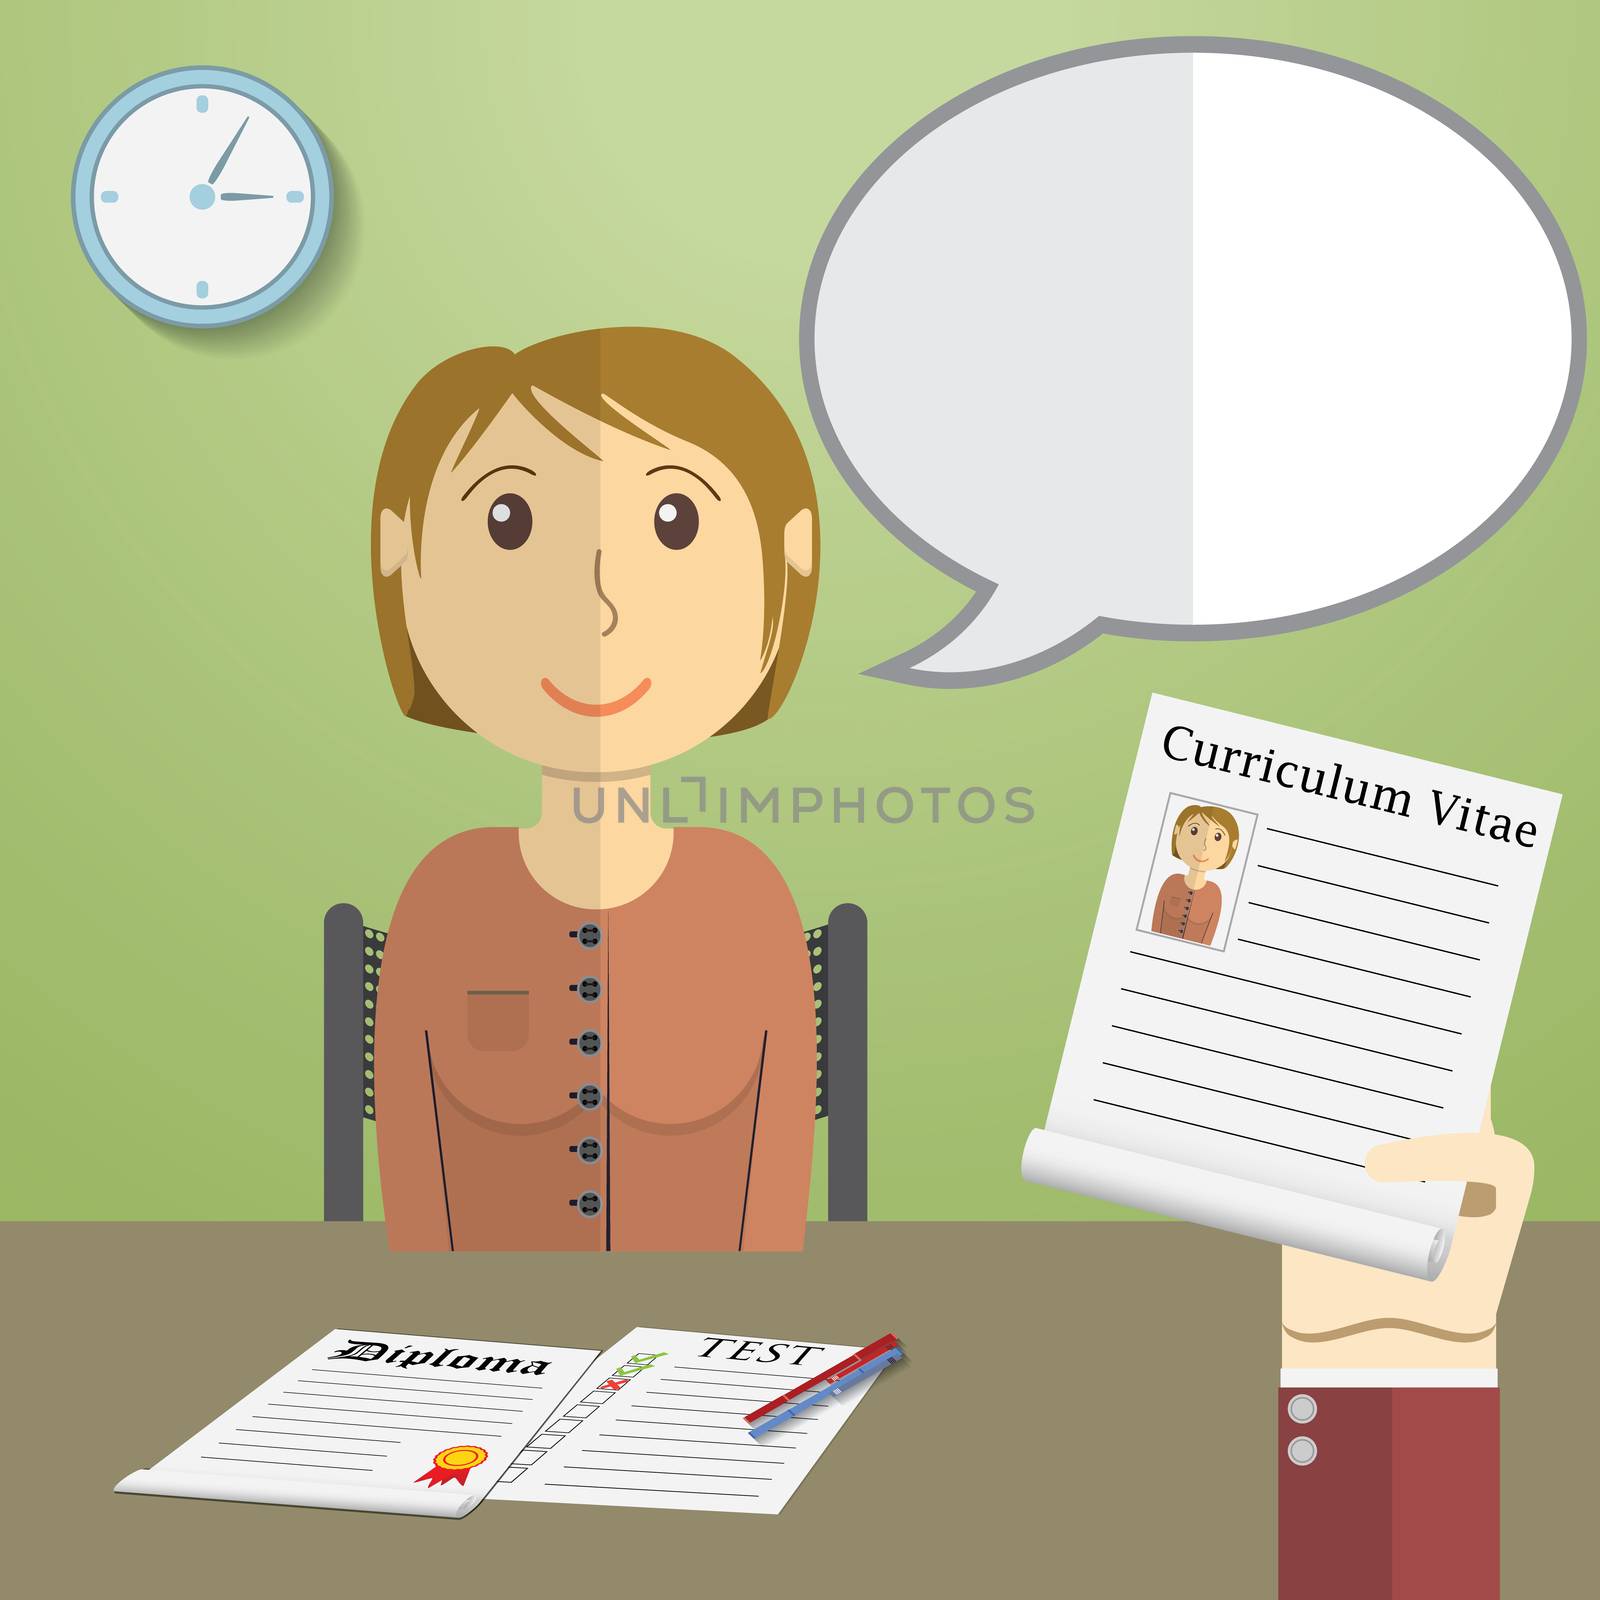 Flat design vector illustration concept for job interview, Hand Holding CV Profile talking to Candidate on Position.